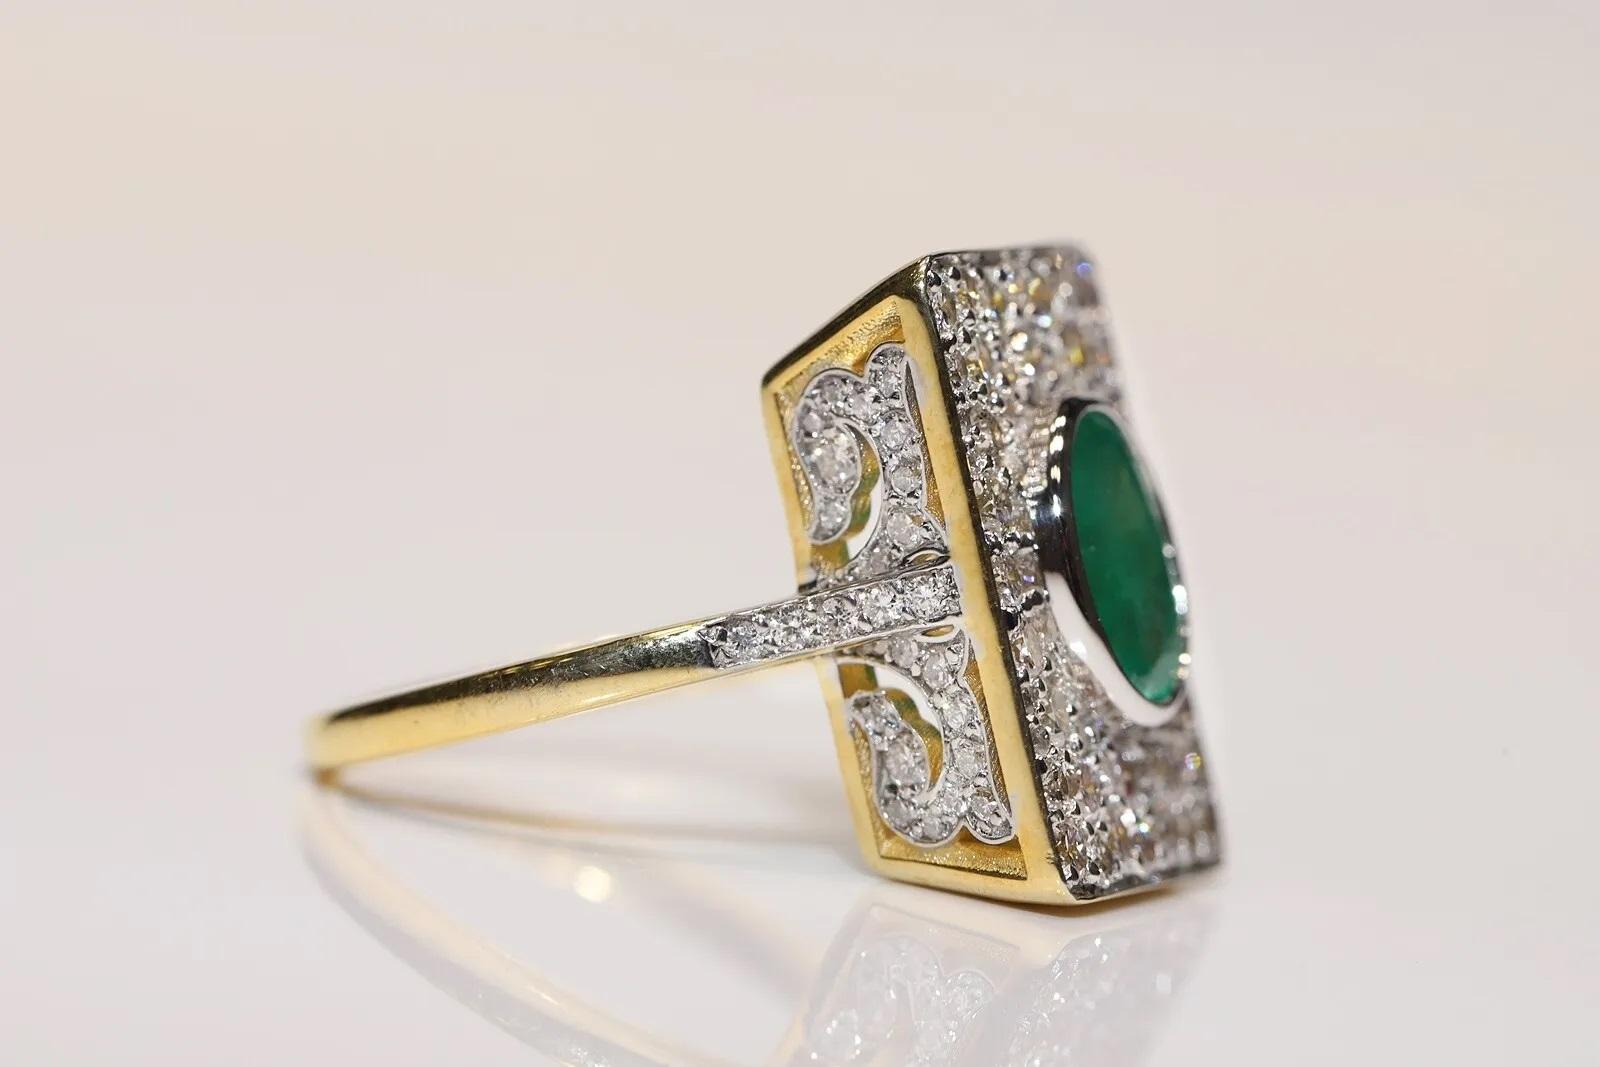 In very good condition.
Total weight is 7.2 grams.
Totally is diamond  1.40 carat.
The diamond is has  F-G color and vvs-vs clarity.
Totally  is emerald 1.65 carat.
Box is not included.
Ring size is US 6.5 (We offer free resizing)
We can make any